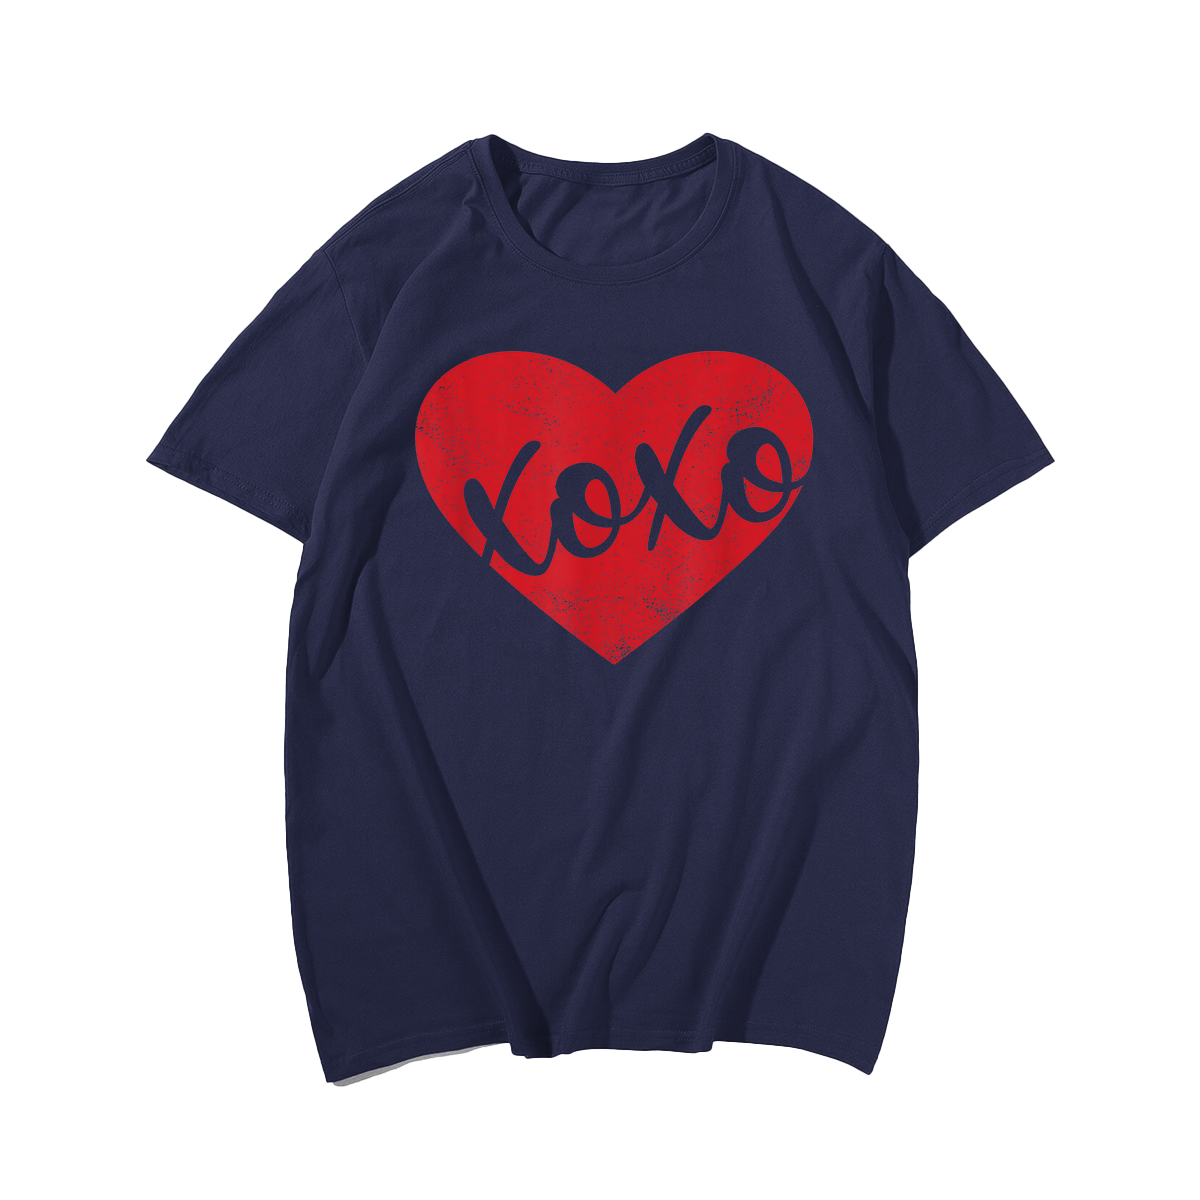 XOXO Love Valentines Day Heart T-Shirt, Men Plus Size Oversize T-shirt for Big & Tall Man